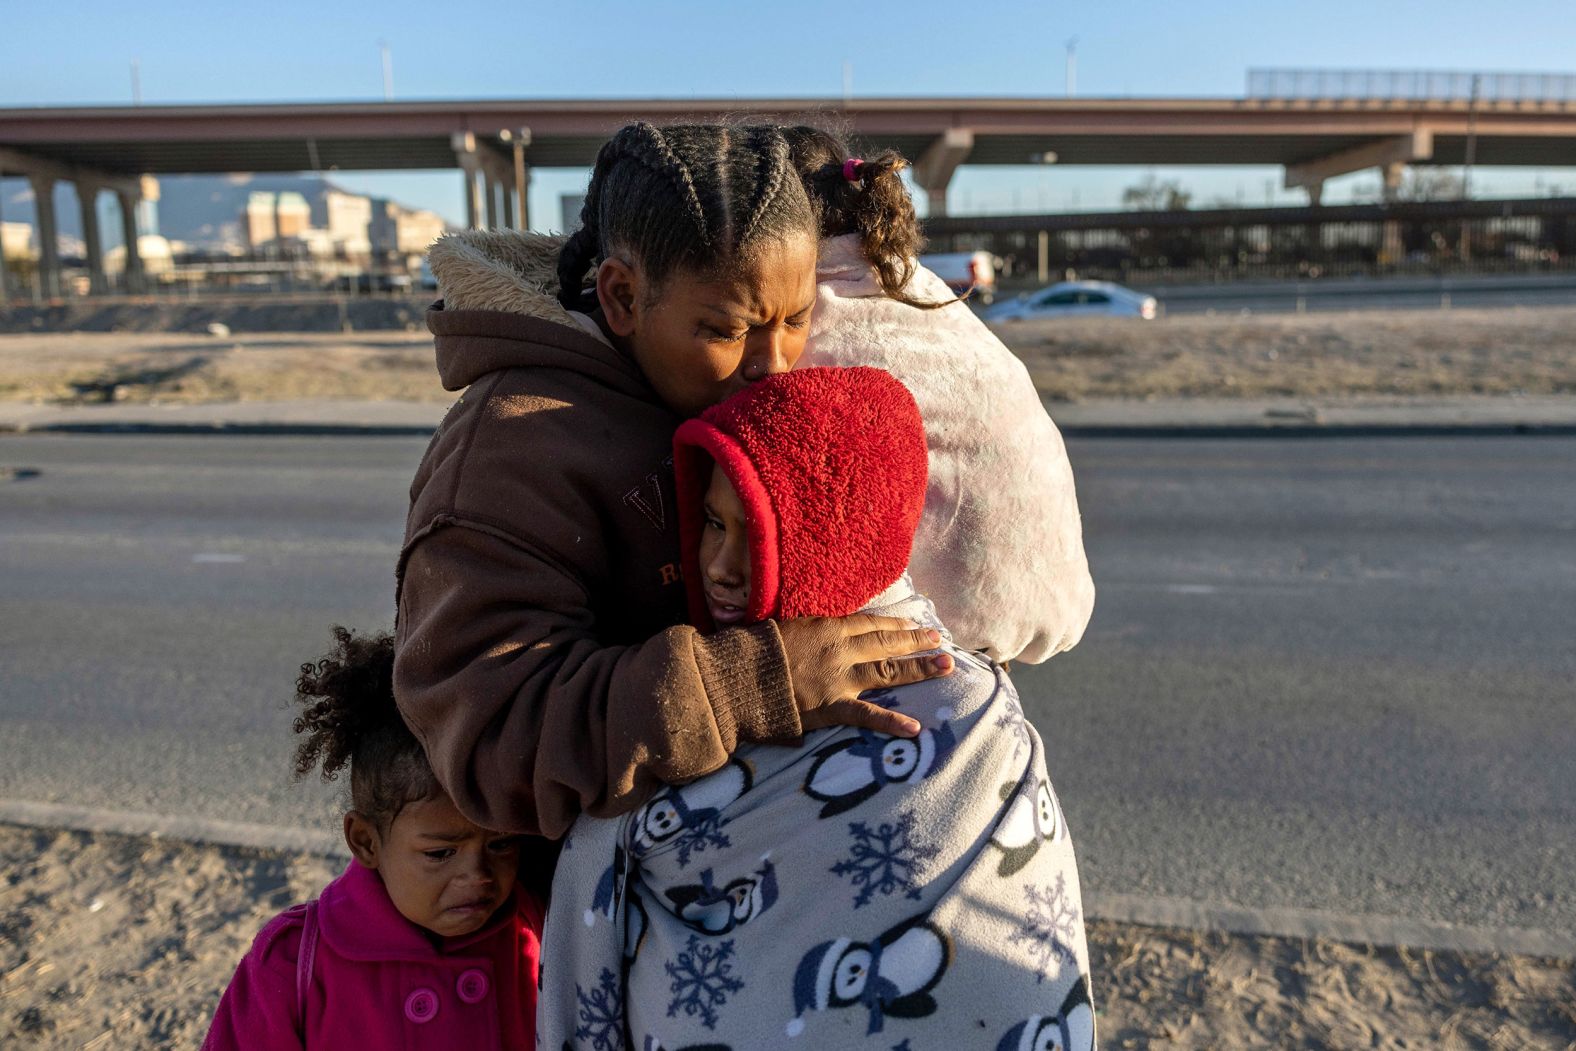 Venezuelan immigrant Yaneisi Martinez weeps while embracing her three children after Texas National Guard troops and state police blocked a popular border crossing area on December 20 in Ciudad Juárez, Mexico. The family is among <a href="https://www.cnn.com/interactive/2022/12/us/el-paso-crossings-migrant-stories-reaj-cnnphotos/" target="_blank">thousands of migrants</a> who arrived in El Paso before the scheduled end of <a href="https://www.cnn.com/2022/11/16/politics/title-42-blocked-whats-next-explainer-cec/index.html" target="_blank">Title 42</a>, a policy that officials have been relying on to kick many migrants out of the United States.